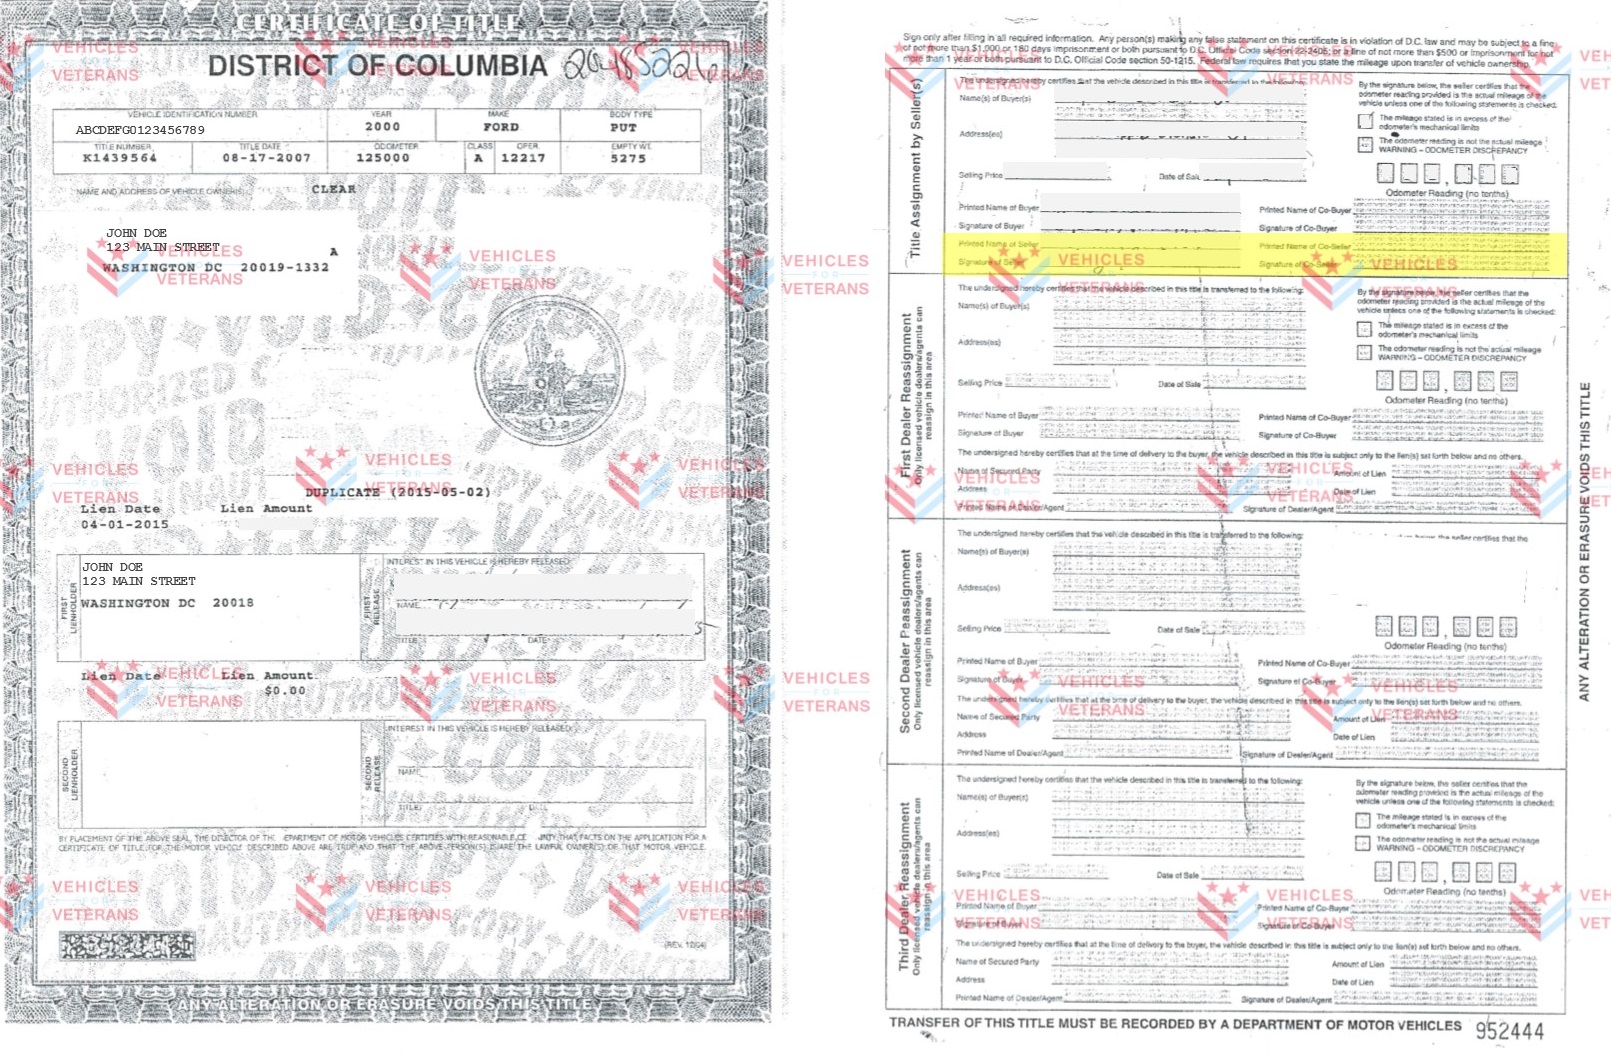 How to fill out a Washington DC vehicle title when donating a car